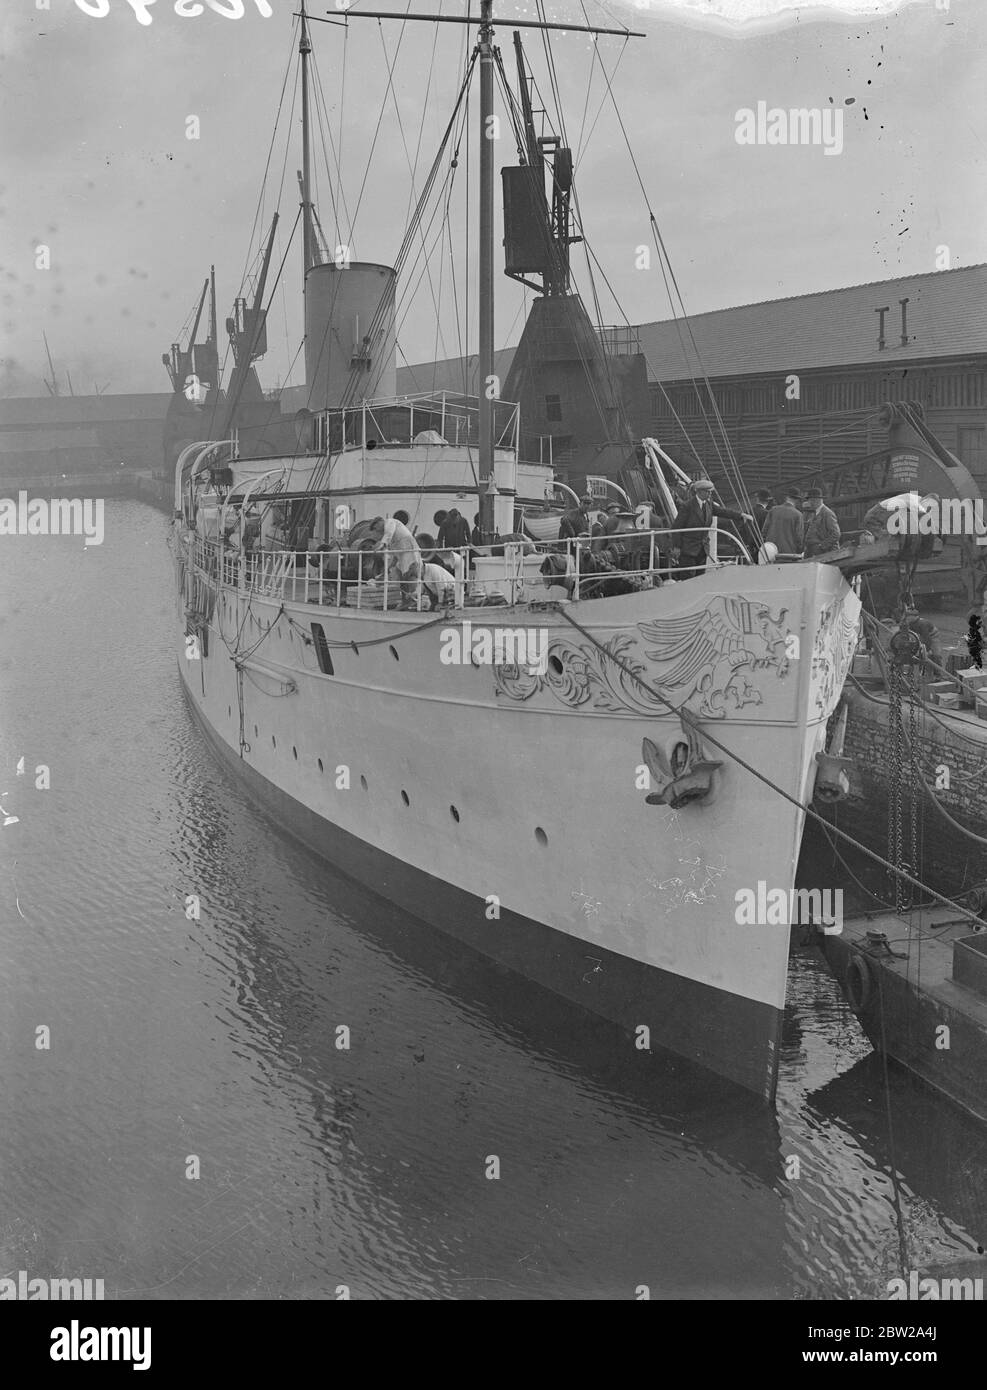 Duke's luxury yacht being turned into cable laying gunboat at Southampton. The 'Sons Peur', once the cheek of Sutherlands magnificent steam yacht, is being converted into a cable laying and river gunboat for the Government of Iraq at Southampton. Photo shows a general view of the 'Sans Peur' with men at work on her deck at Southampton. 16 October 1937 Stock Photo